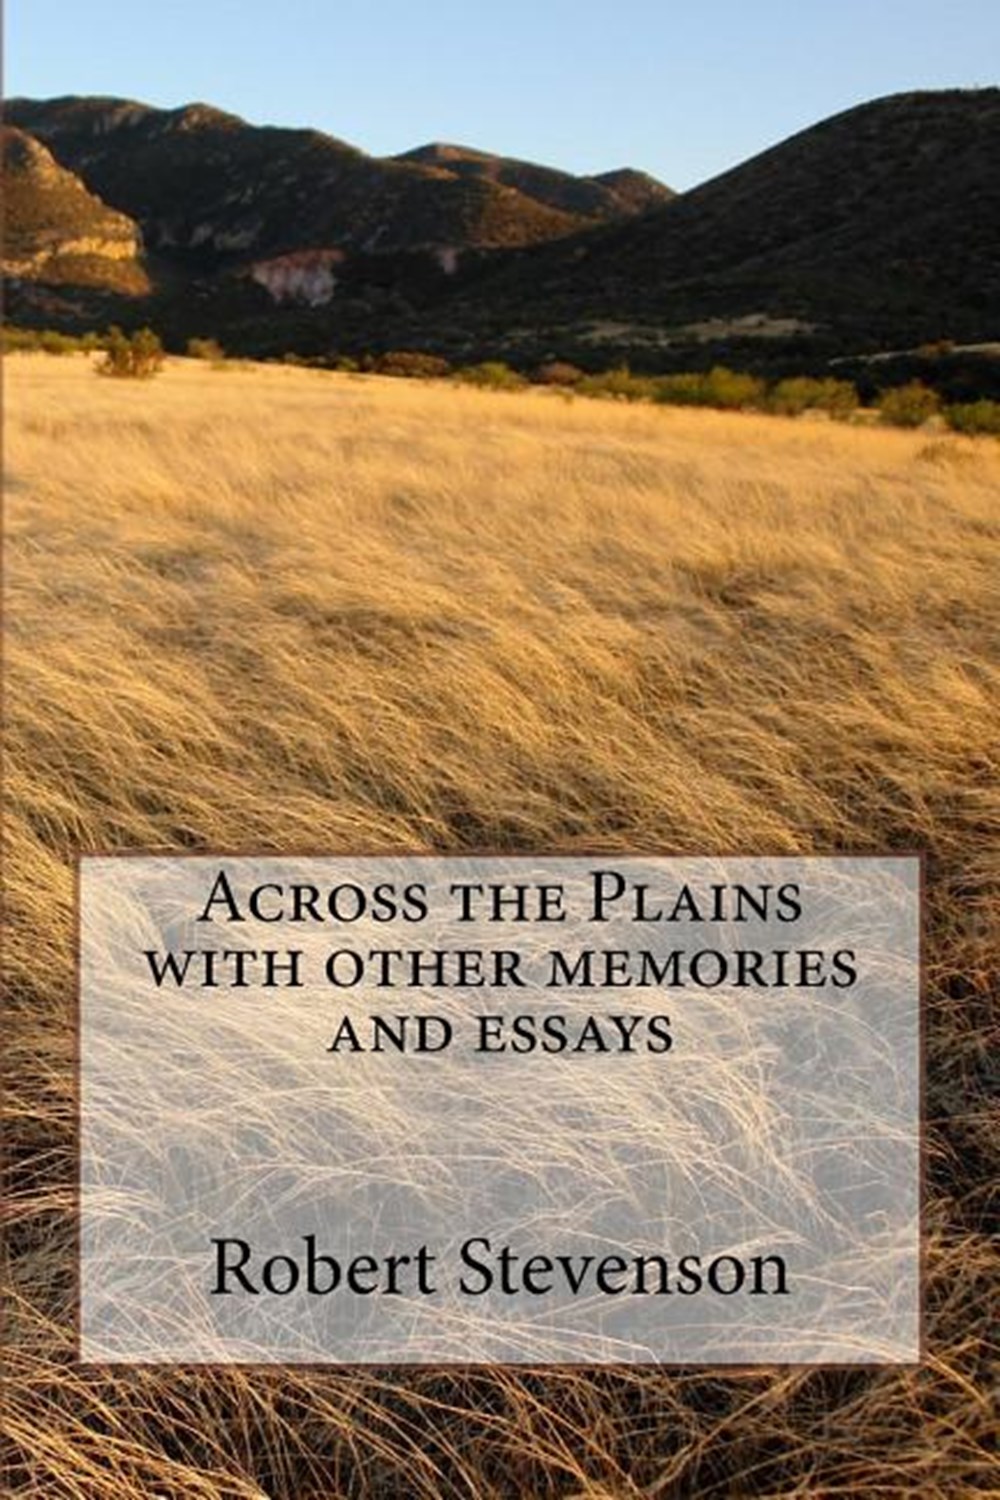 Across the Plains with other memories and essays